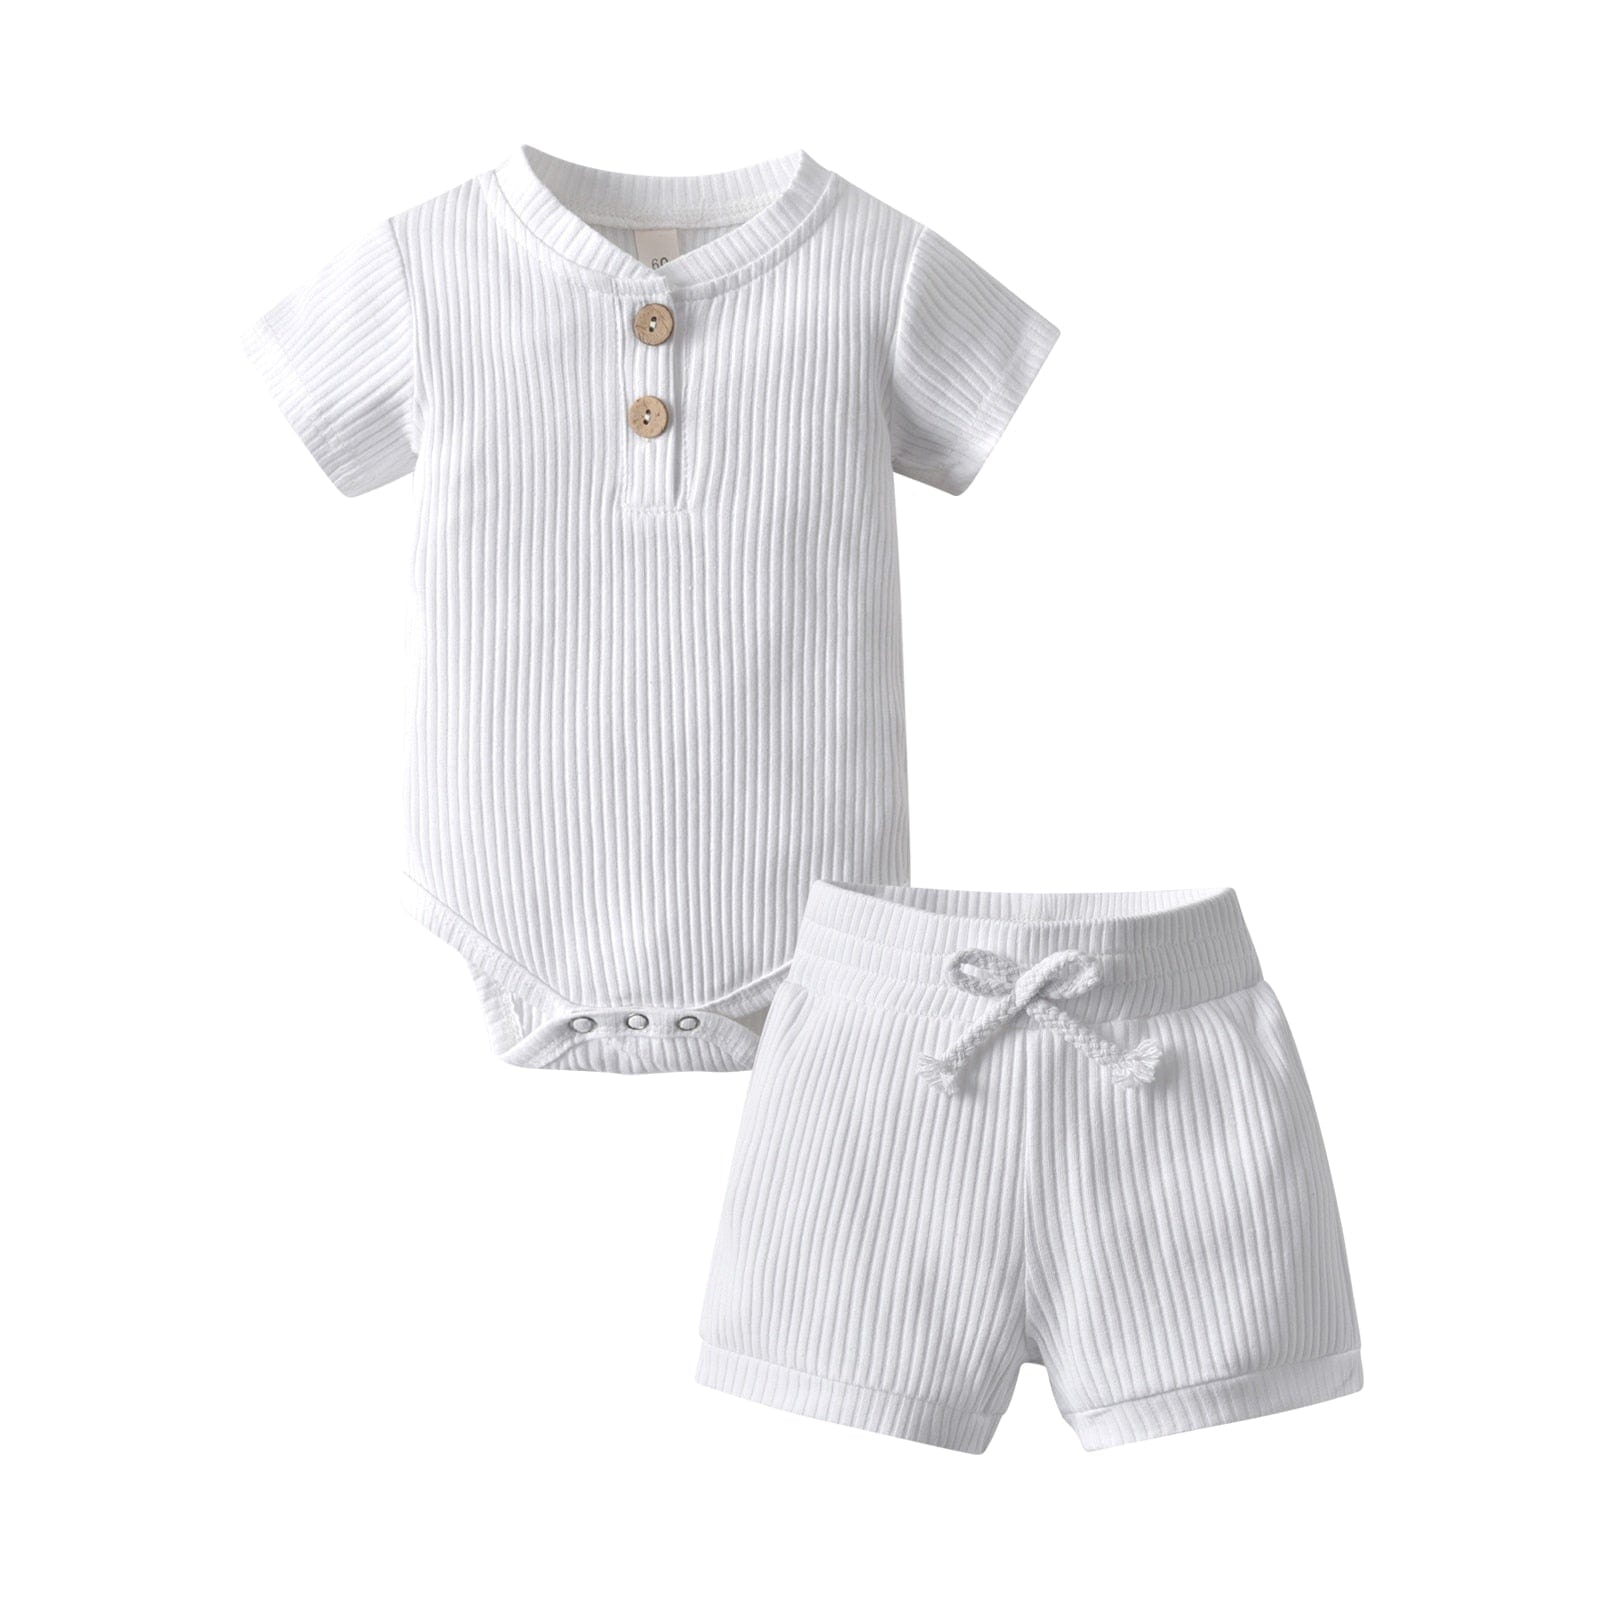 Ribbed Cotton Track Suit - Long or Short Pants